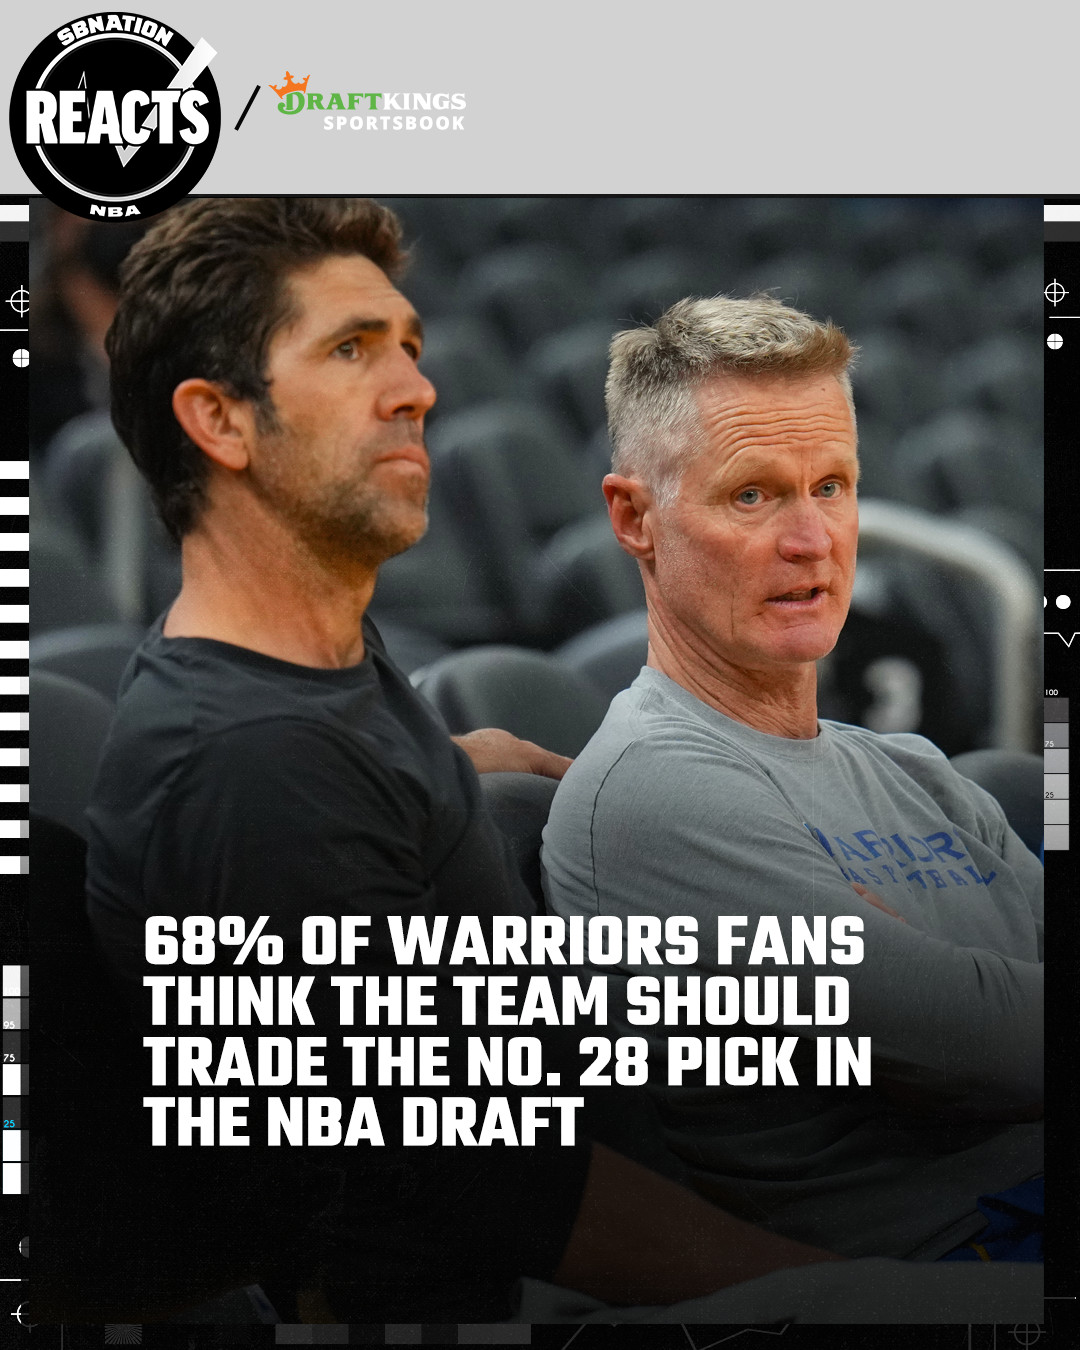 Graphic showing that 68% of polled Warriors fans think they should trade the pick